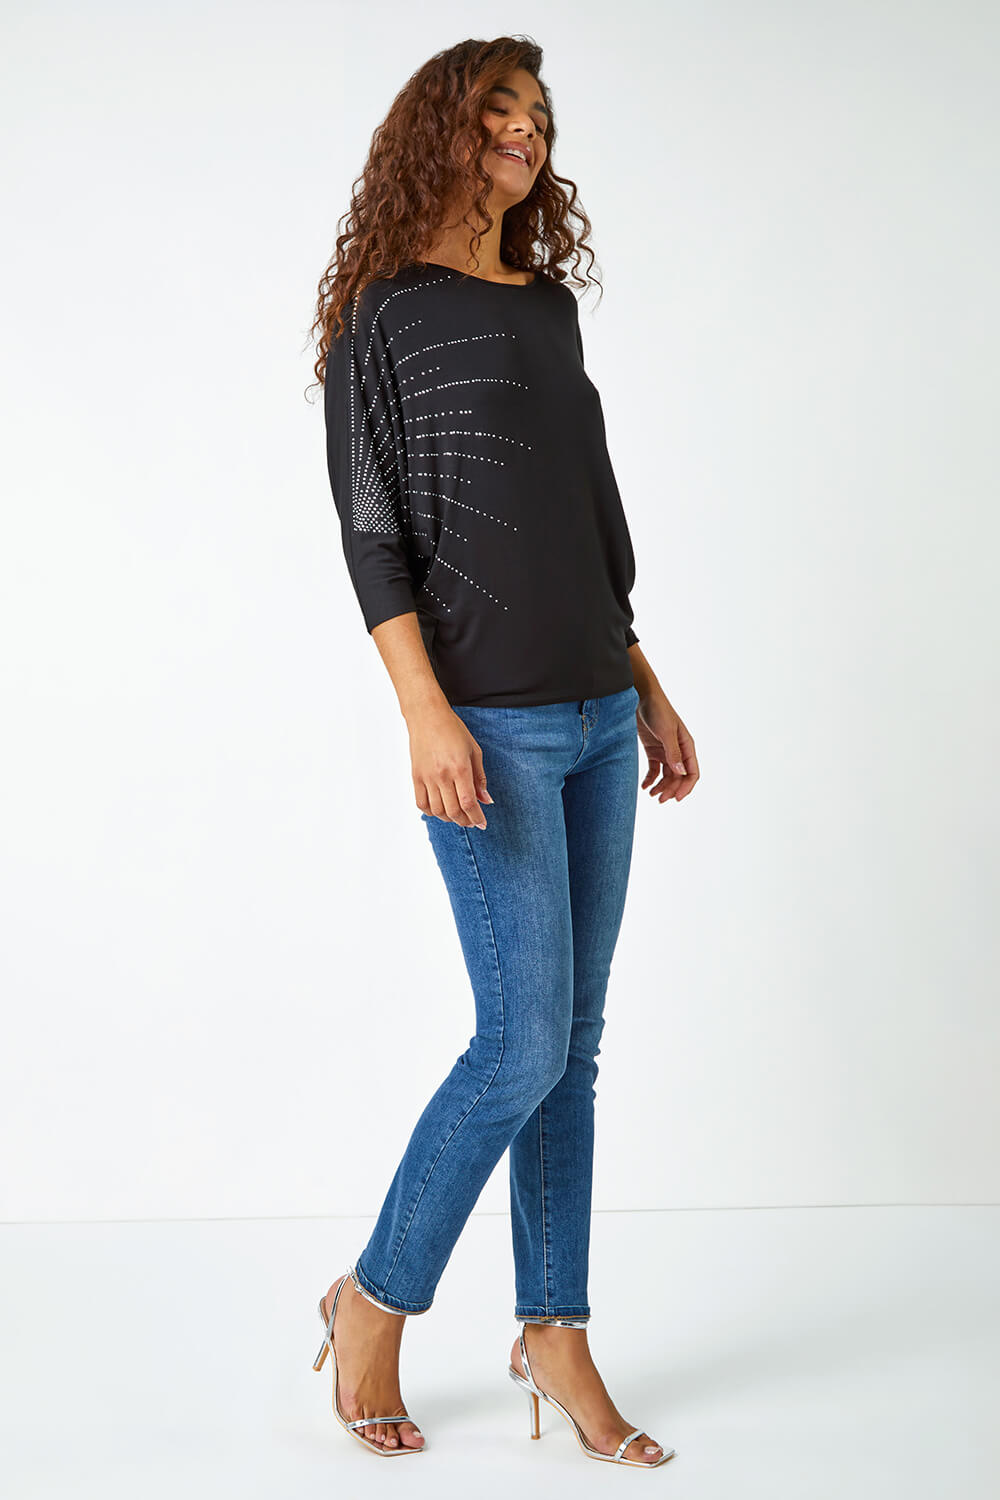 Black Embellished Relaxed Stretch Top, Image 2 of 5